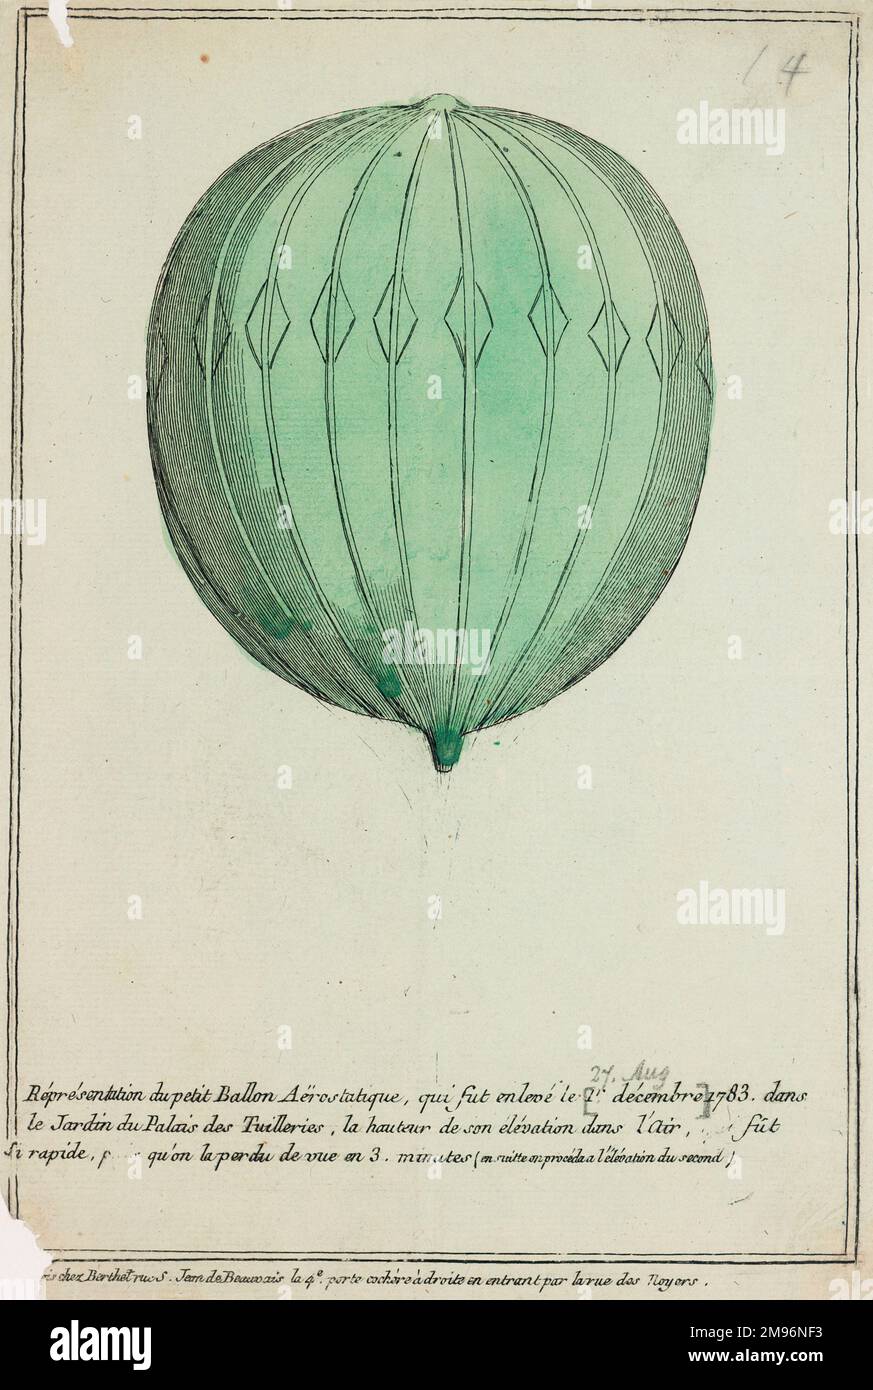 A balloon which ascended from the Tuileries Gardens, Paris, on either 27  August or 1 December